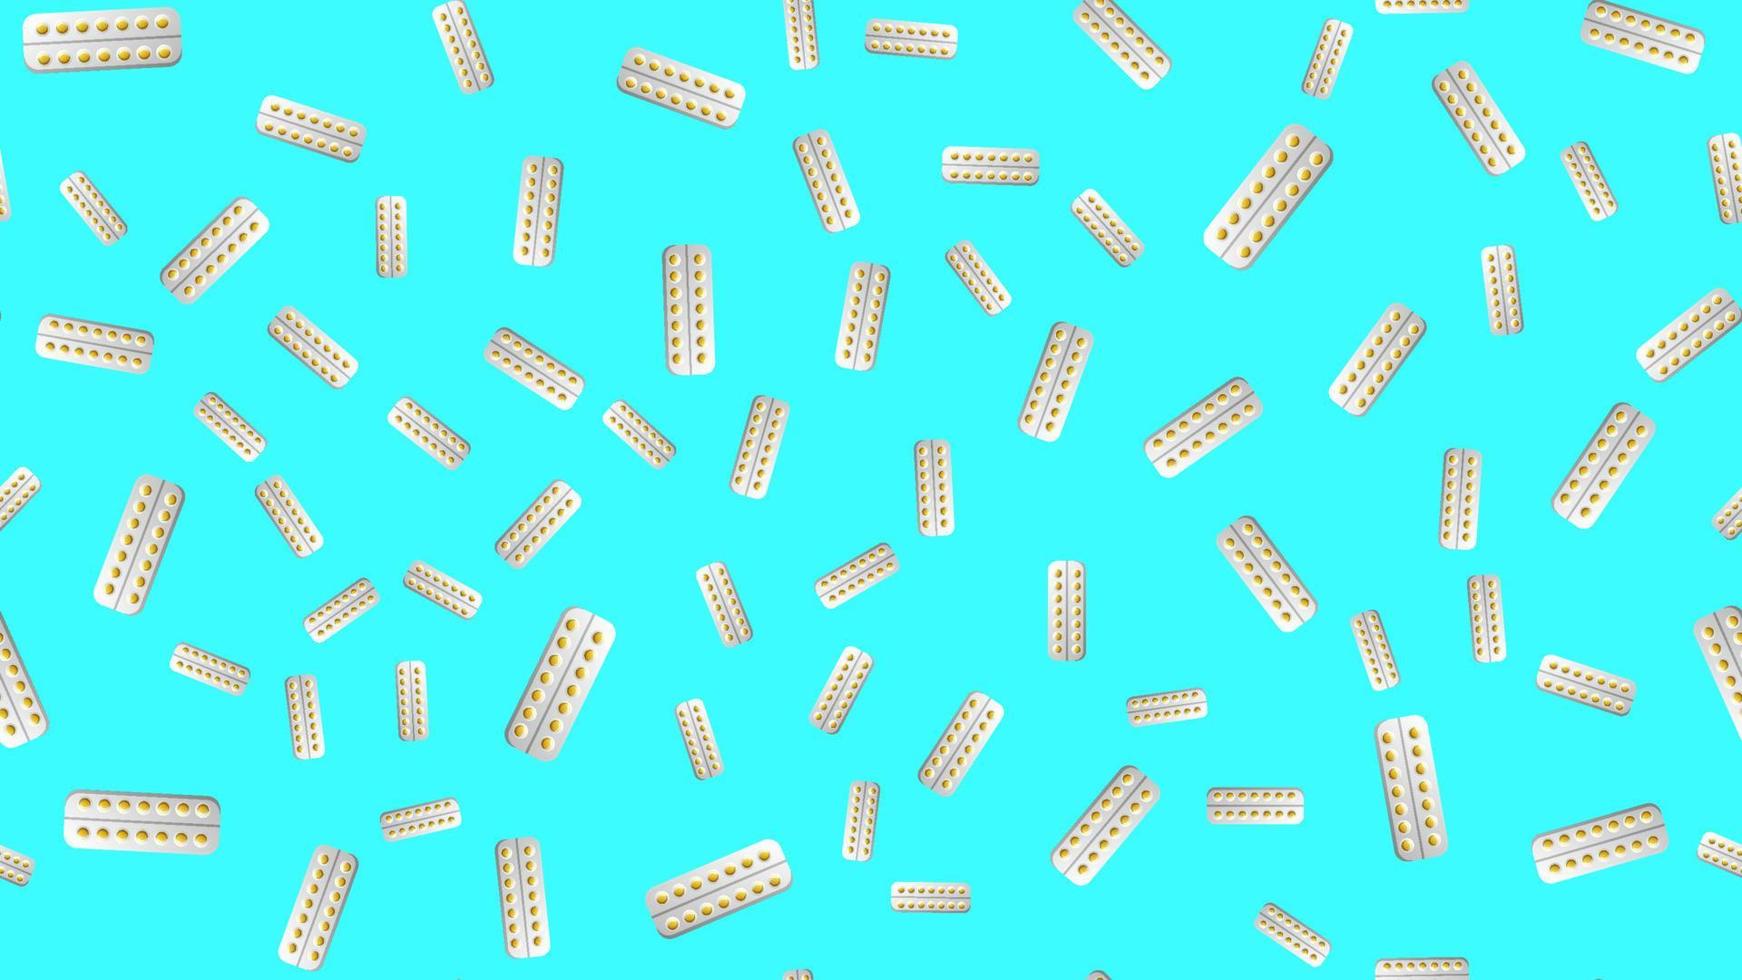 Endless seamless pattern of medical scientific medical items, pharmacological tablets and medications, pill capsules on a white background. Vector illustration